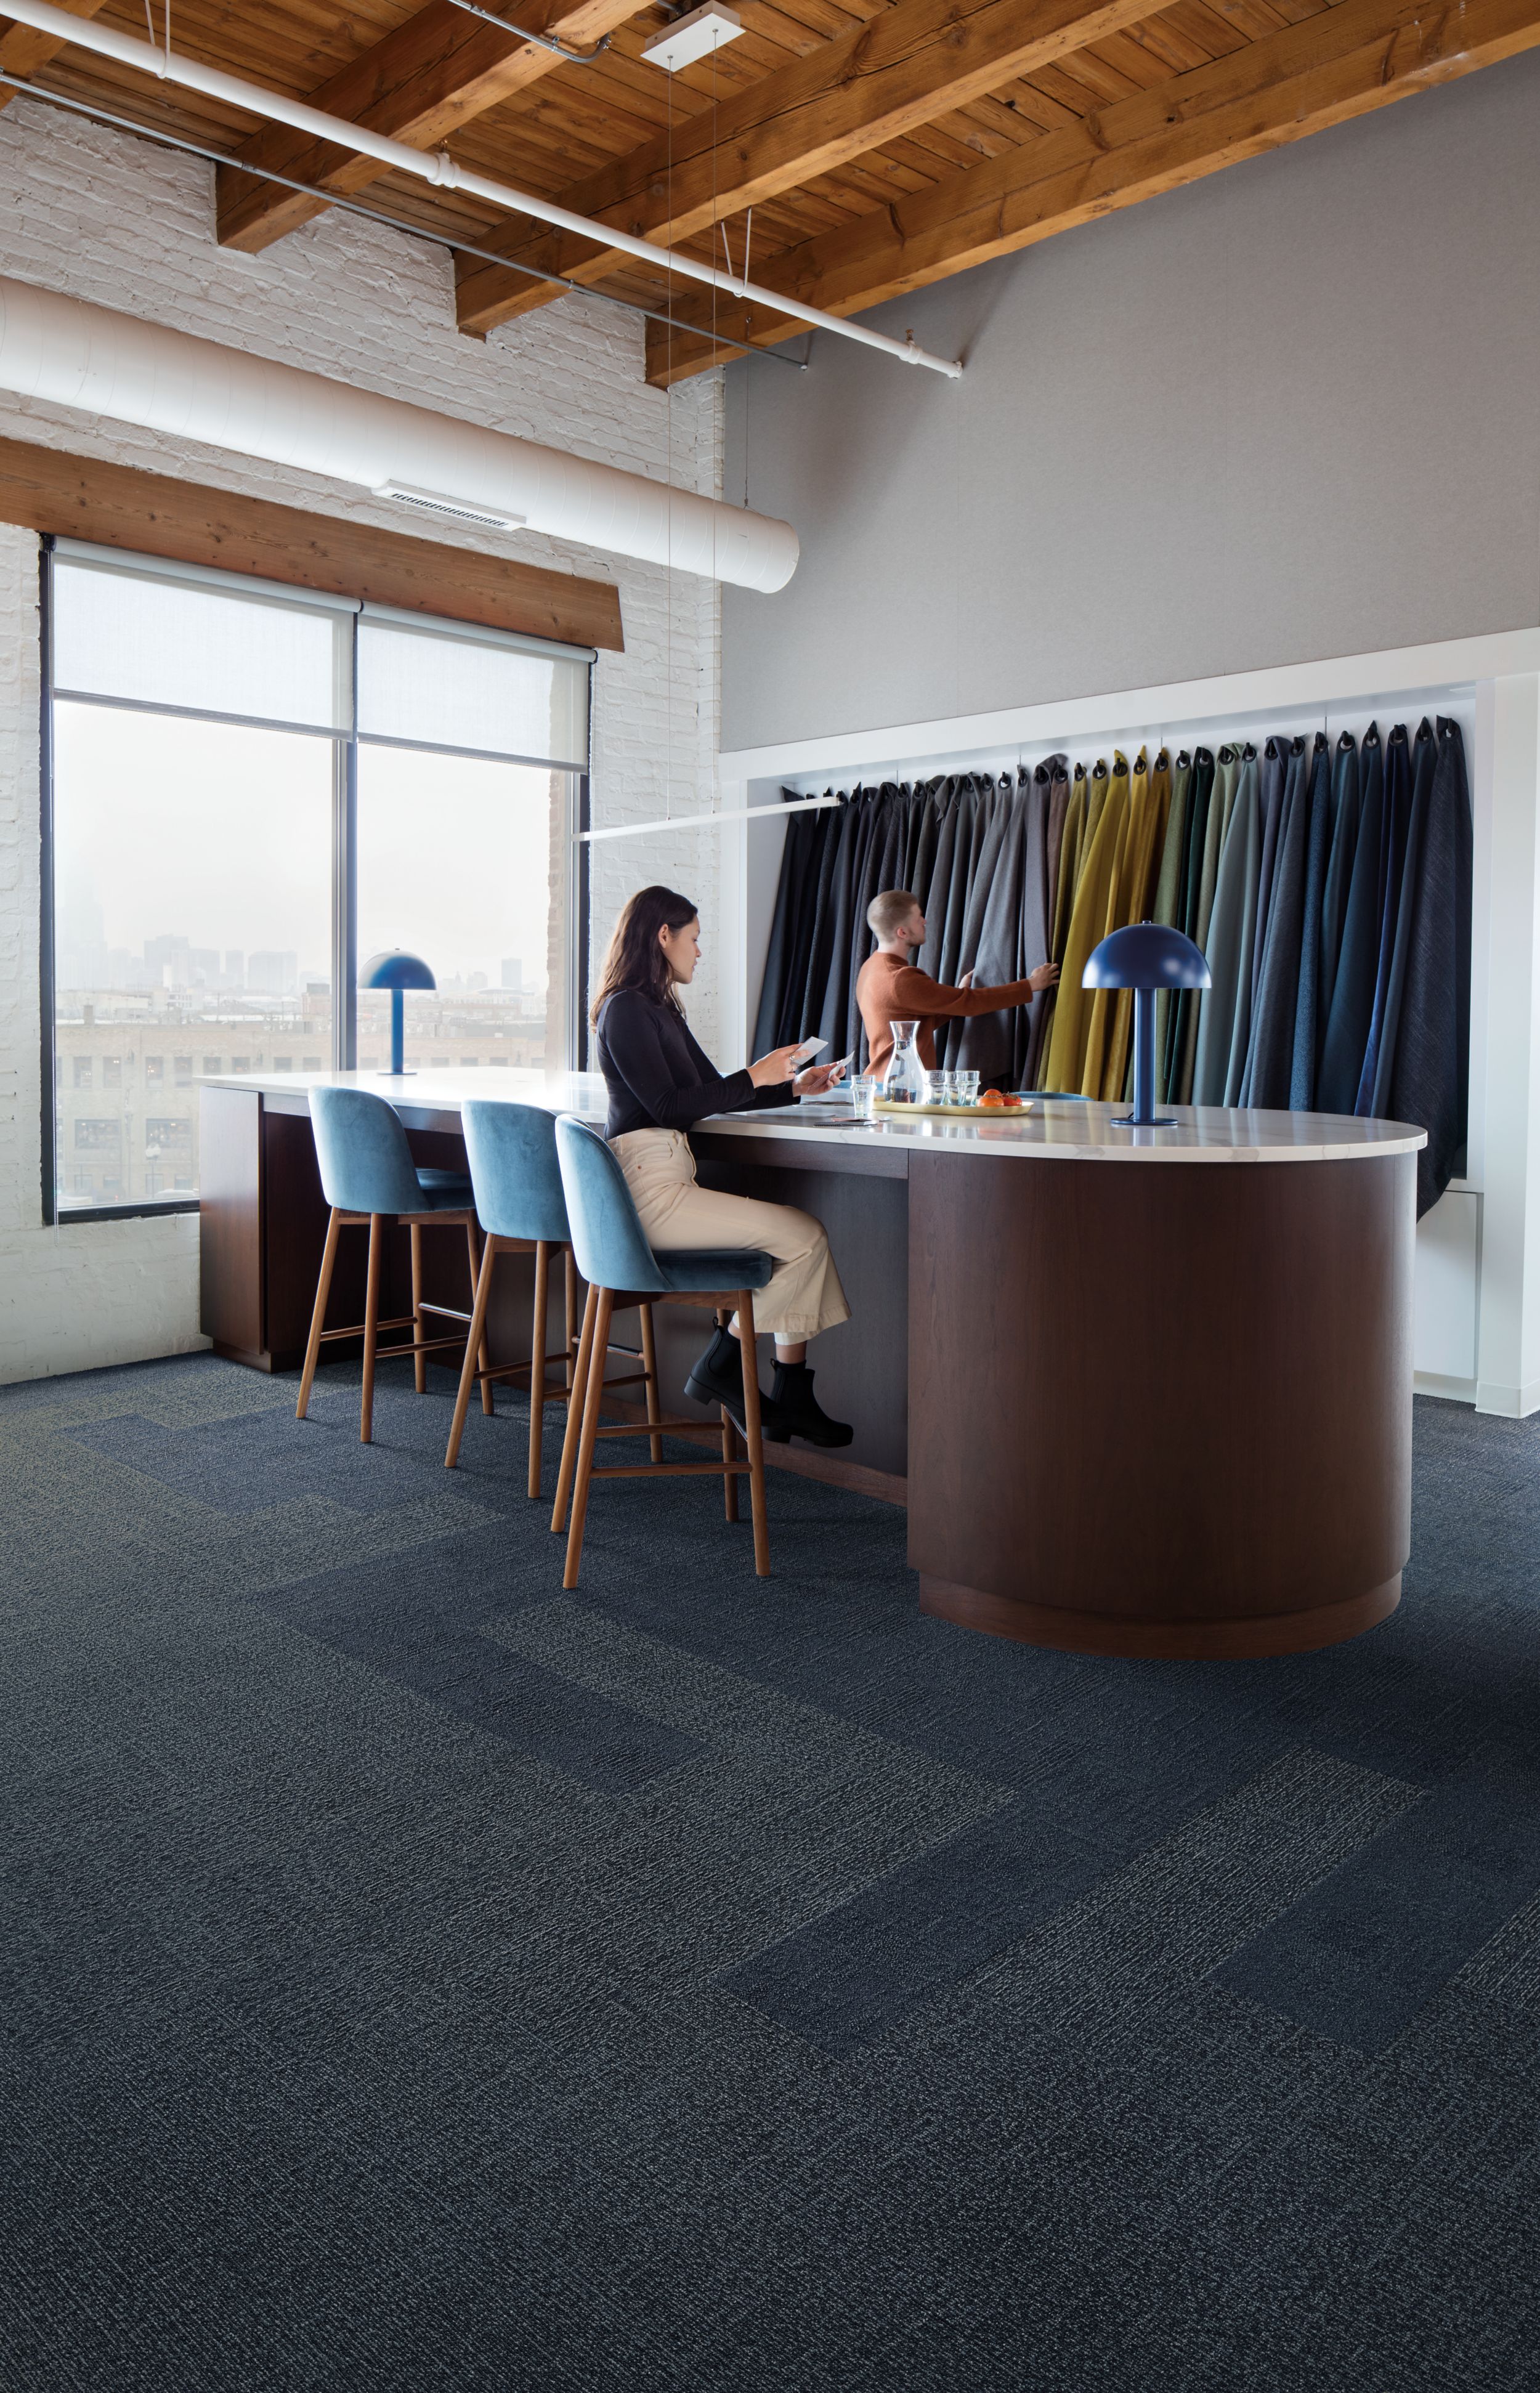 image Interface Shishu Stitch and Vintage Kimono plank carpet tile in workspace with bar height table and person sitting numéro 2